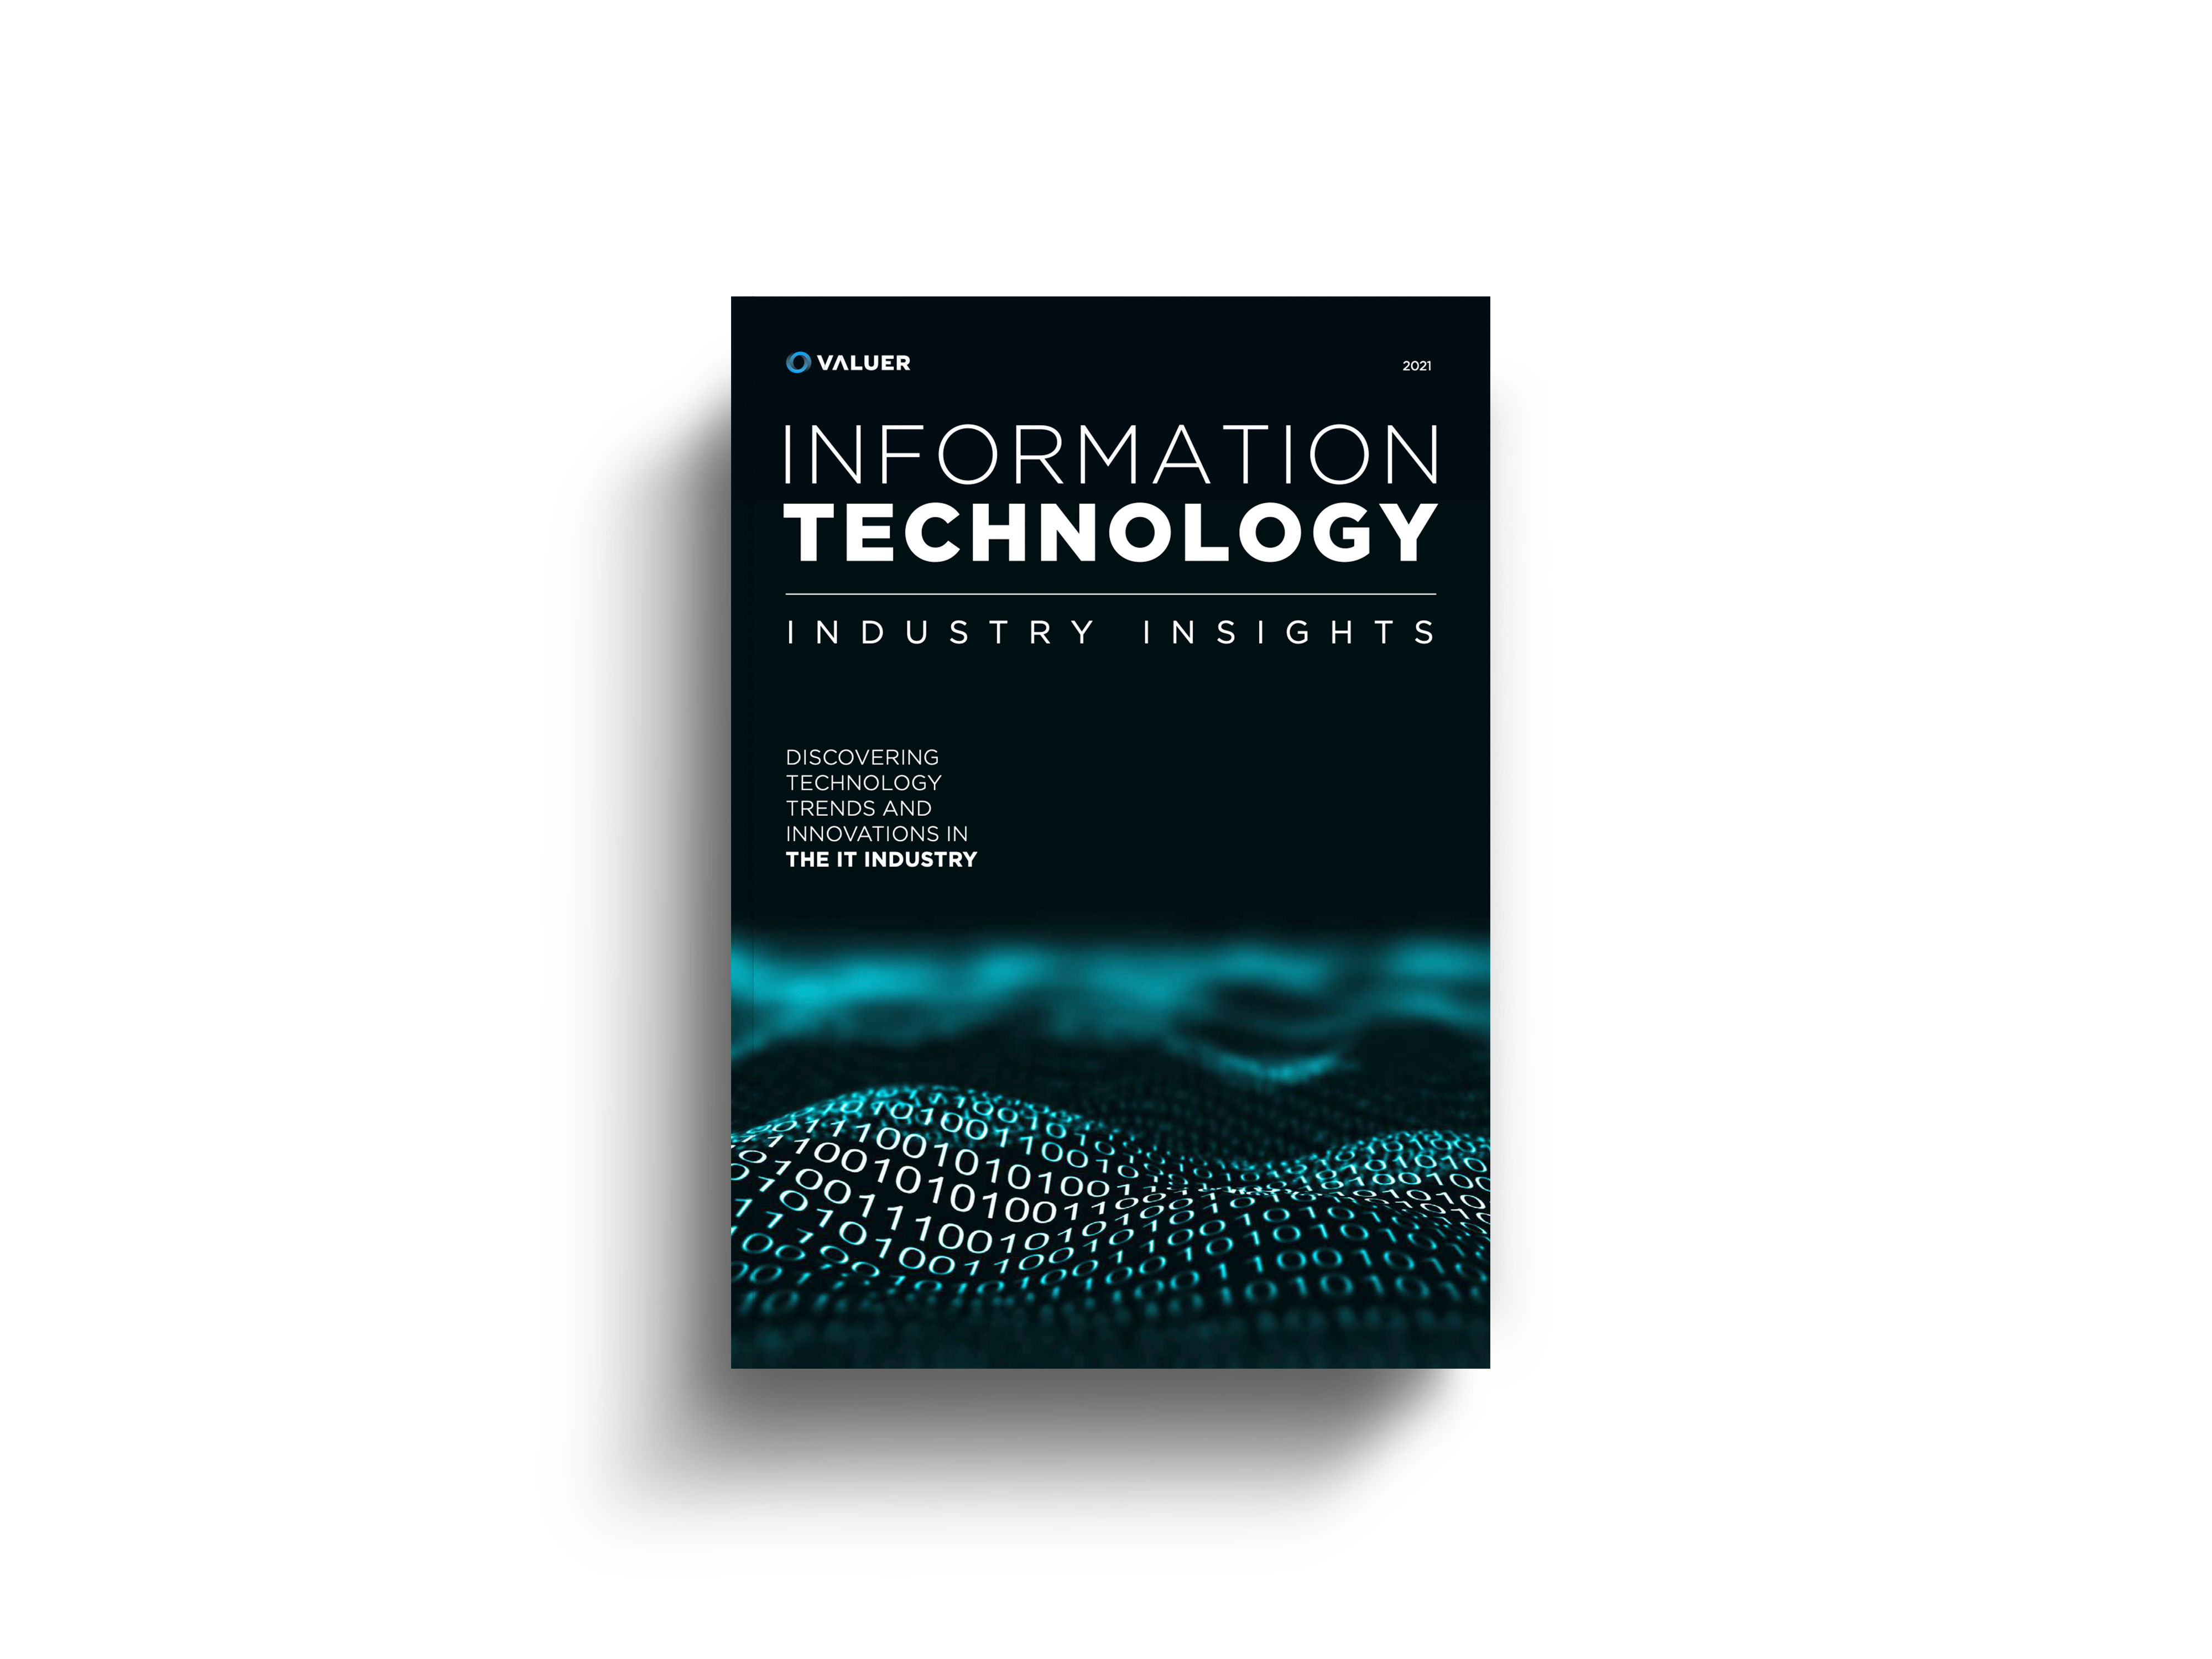 Cover for information technology industry insights case study